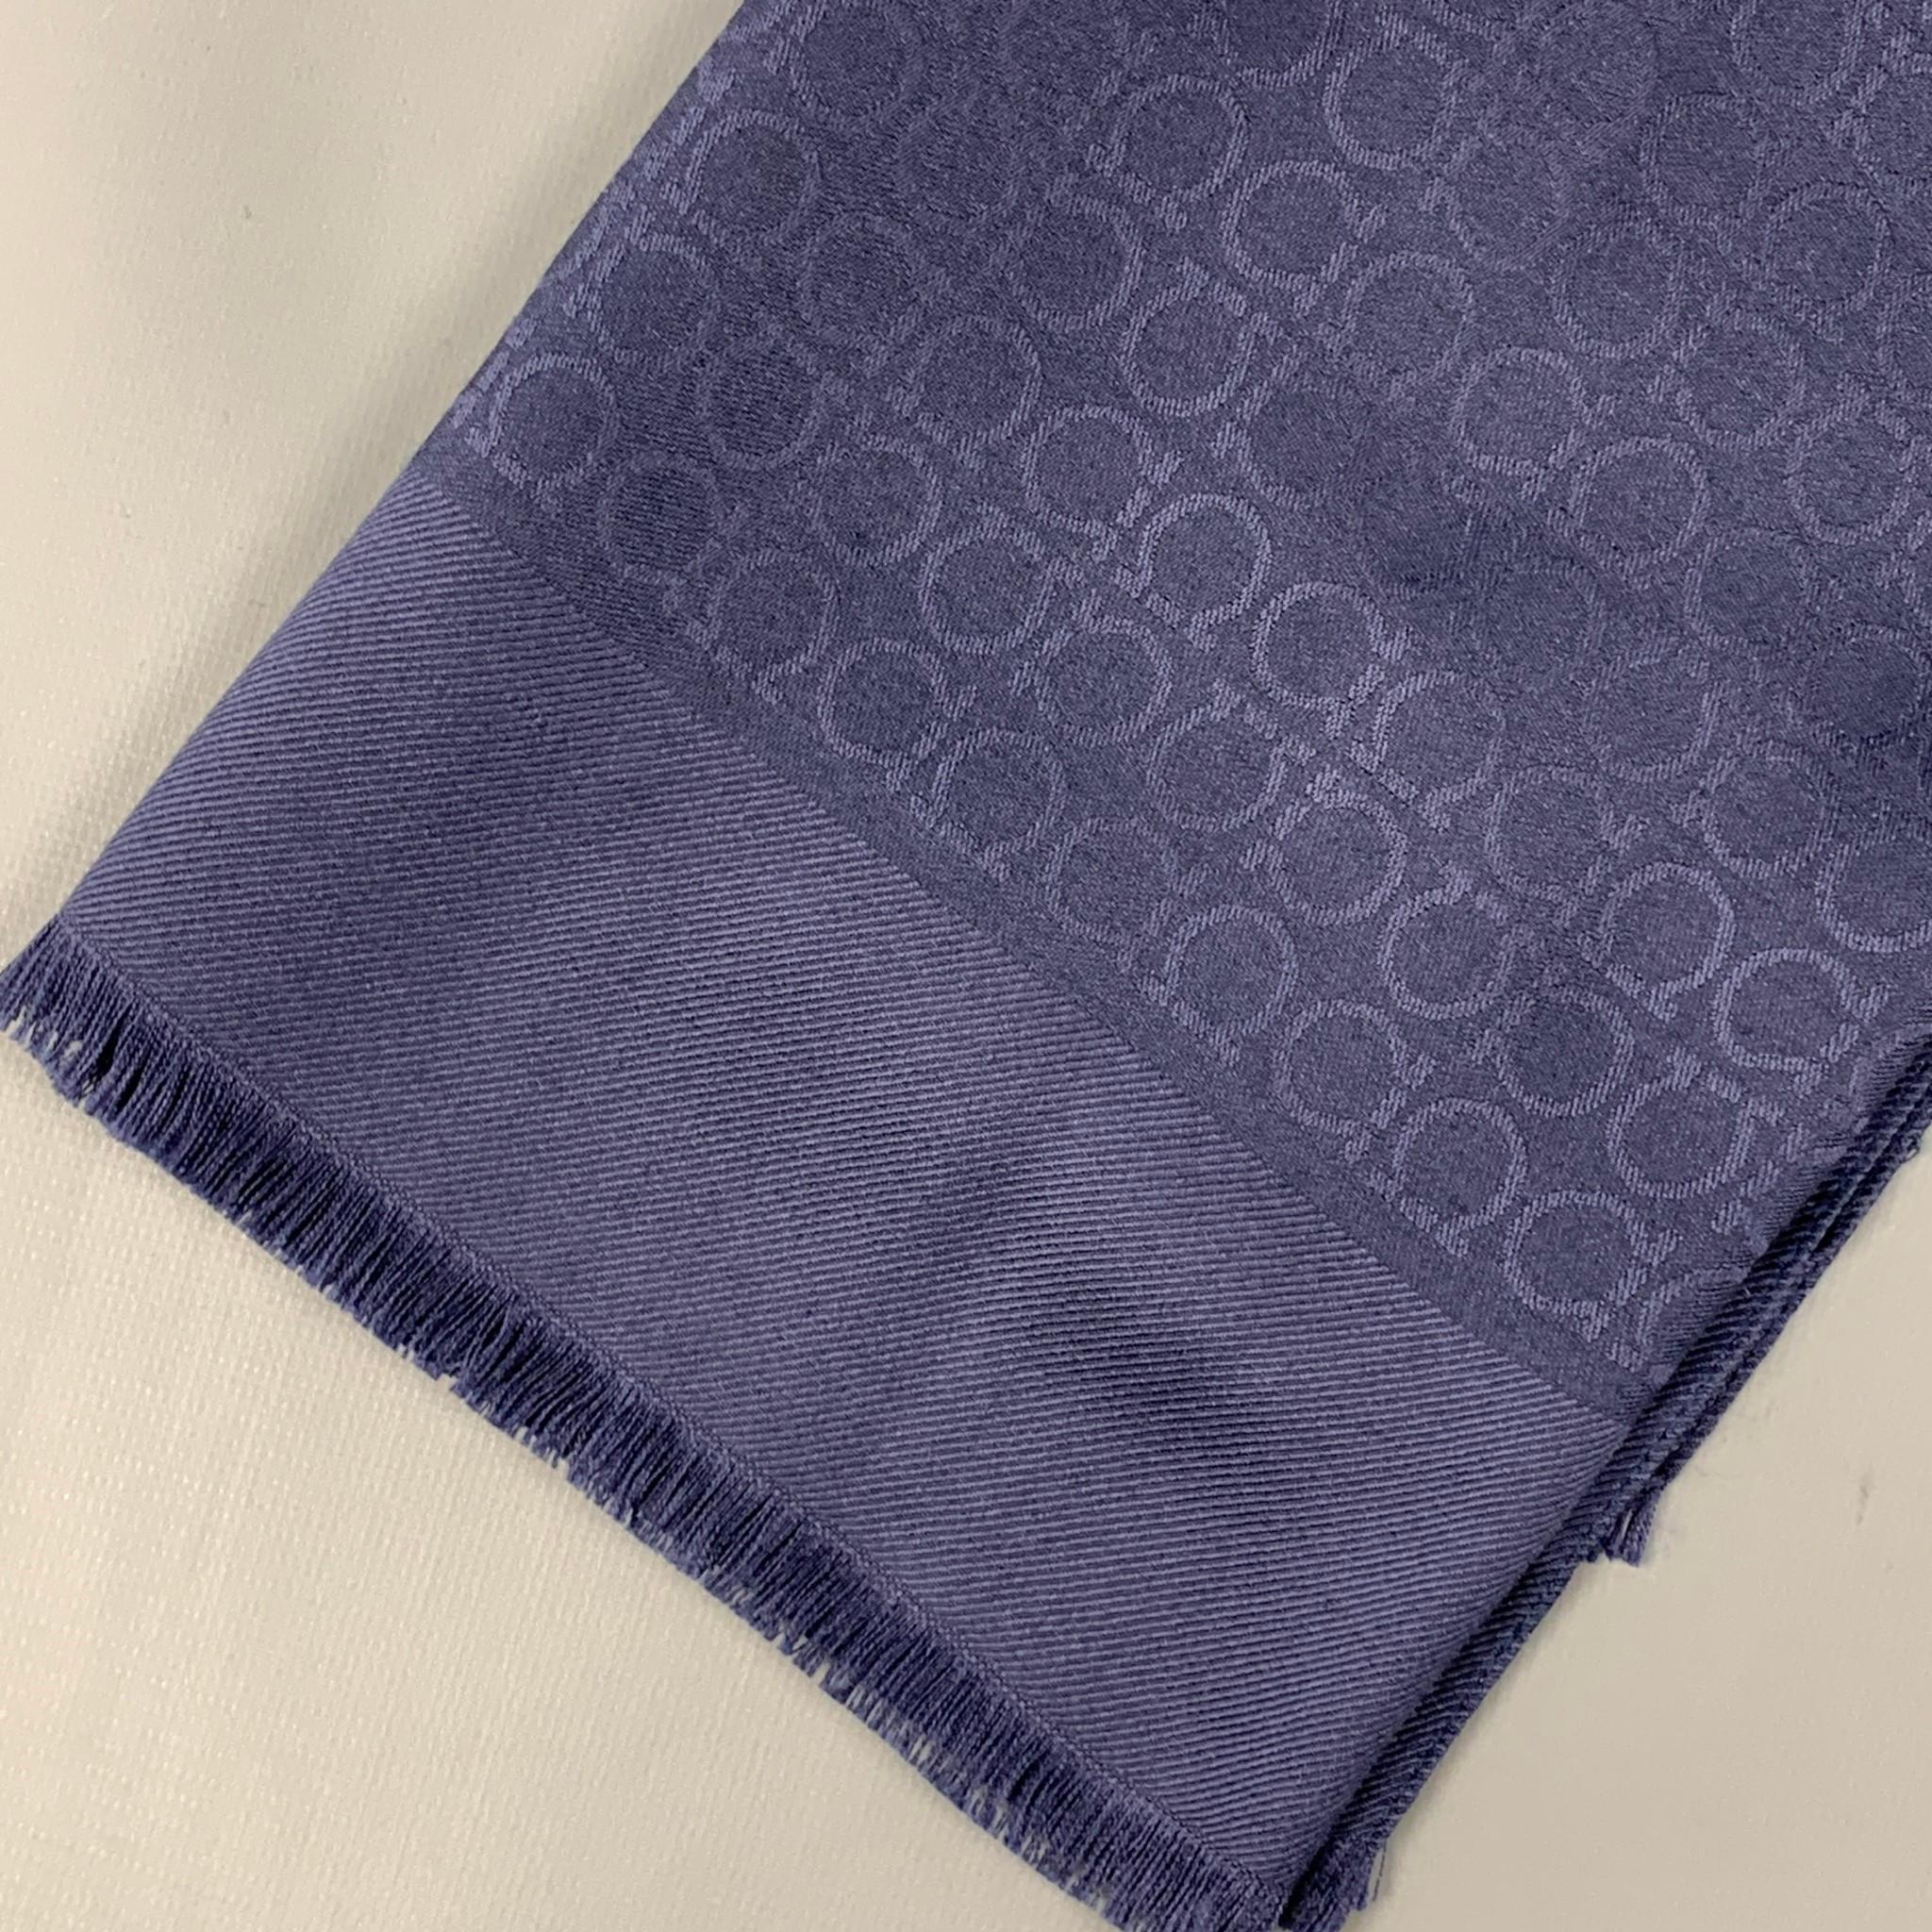 SALVATORE FERRAGAMO scarf comes in a navy logo print wool / silk with a fringe trim. Made in Italy. 

Very Good Pre-Owned Condition.
Original Retail Price: $340.00

Measurements:

70 in. x 28 in. 